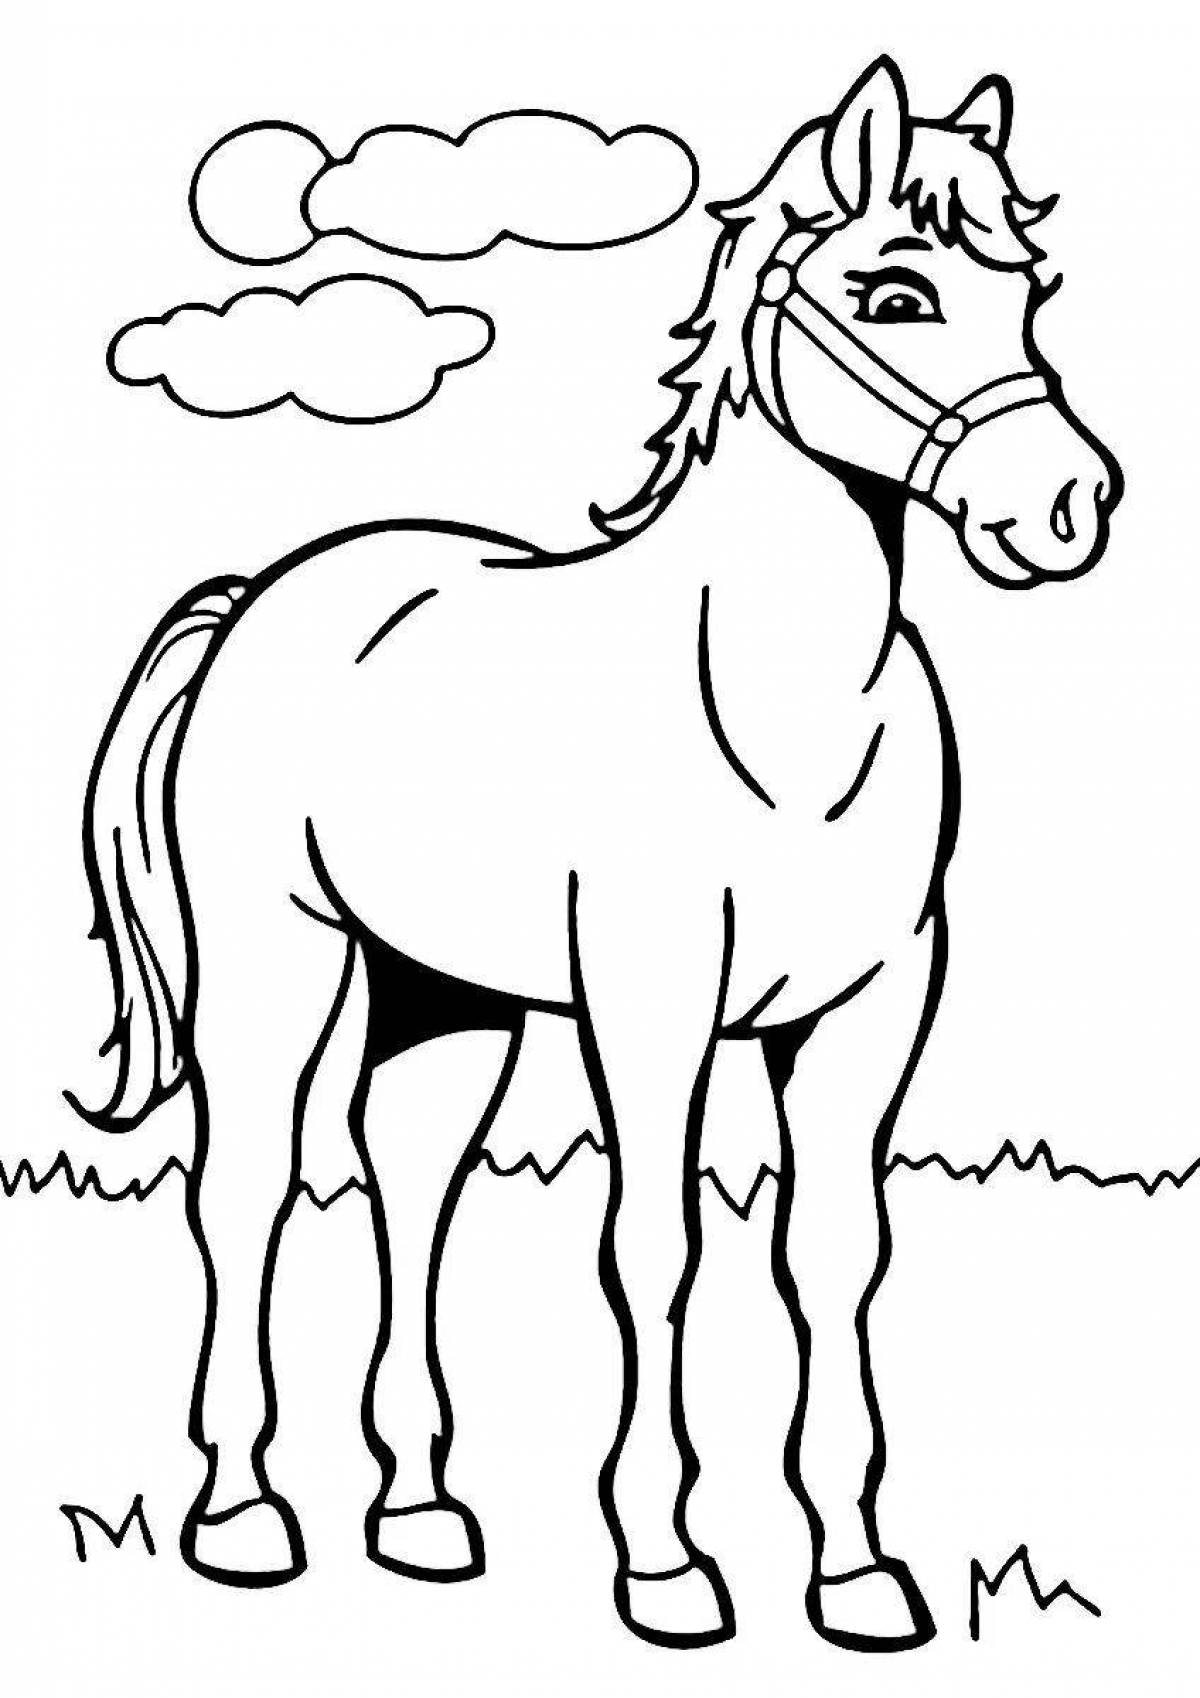 Majestic horse coloring book for kids